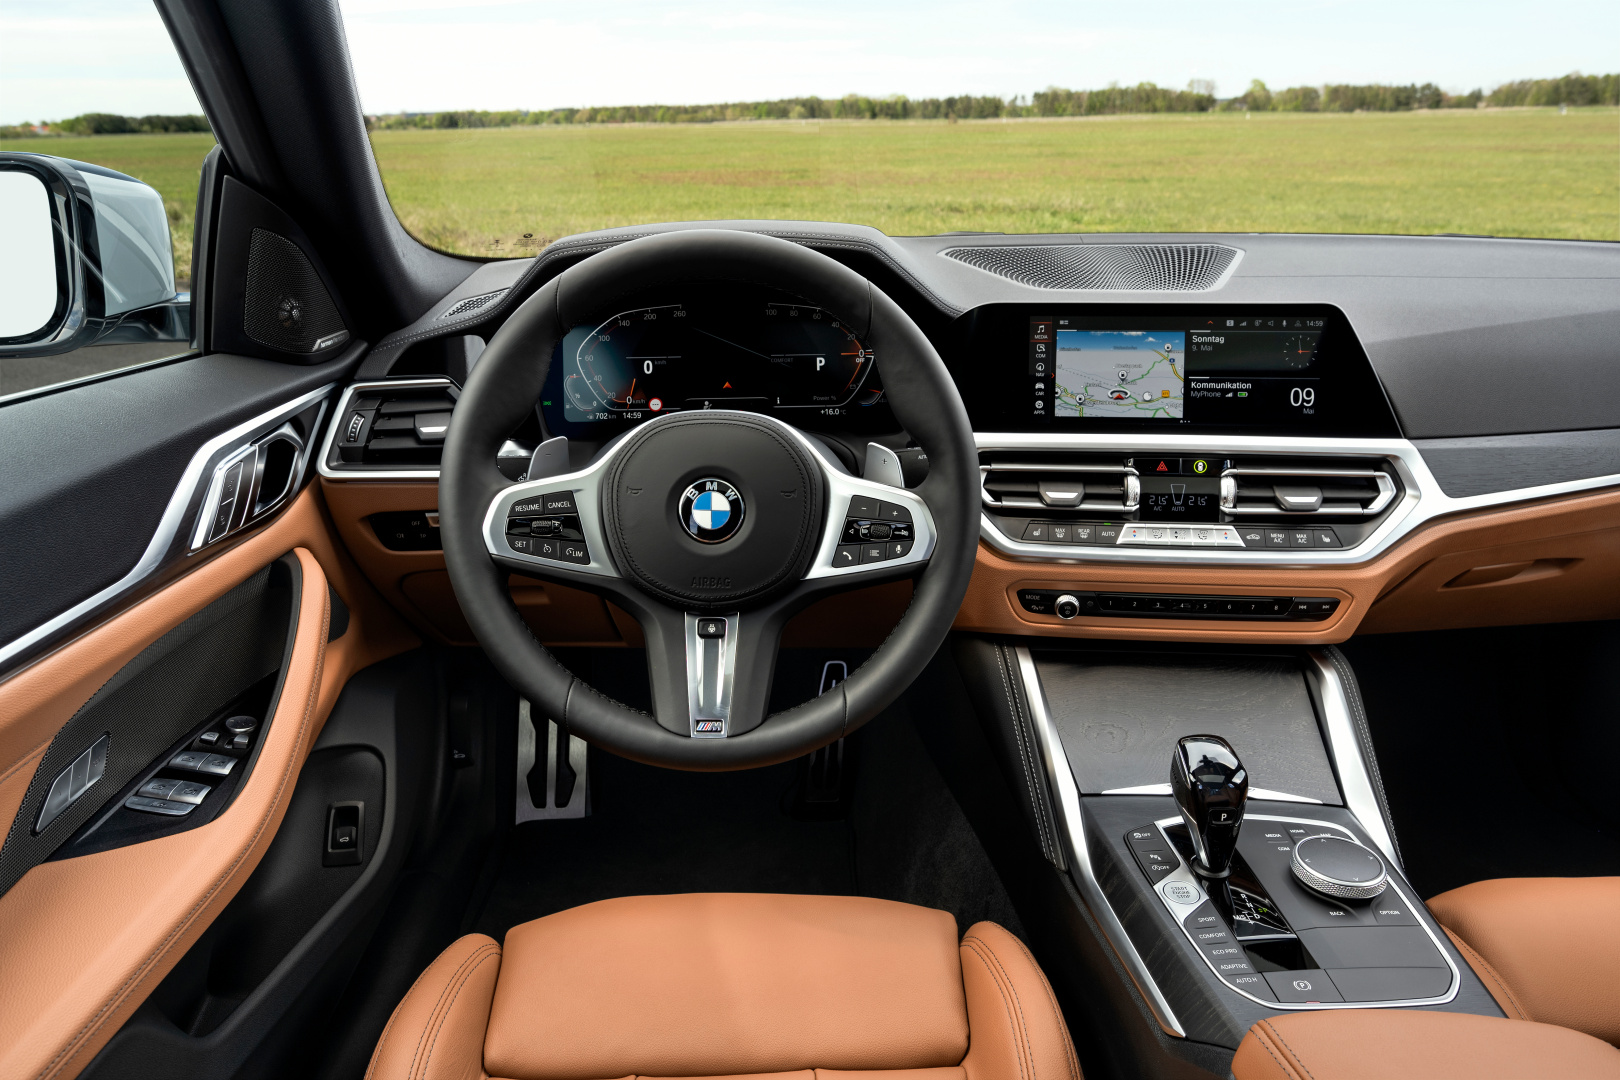 SMALL_P90424611_highRes_the-all-new-bmw-430i